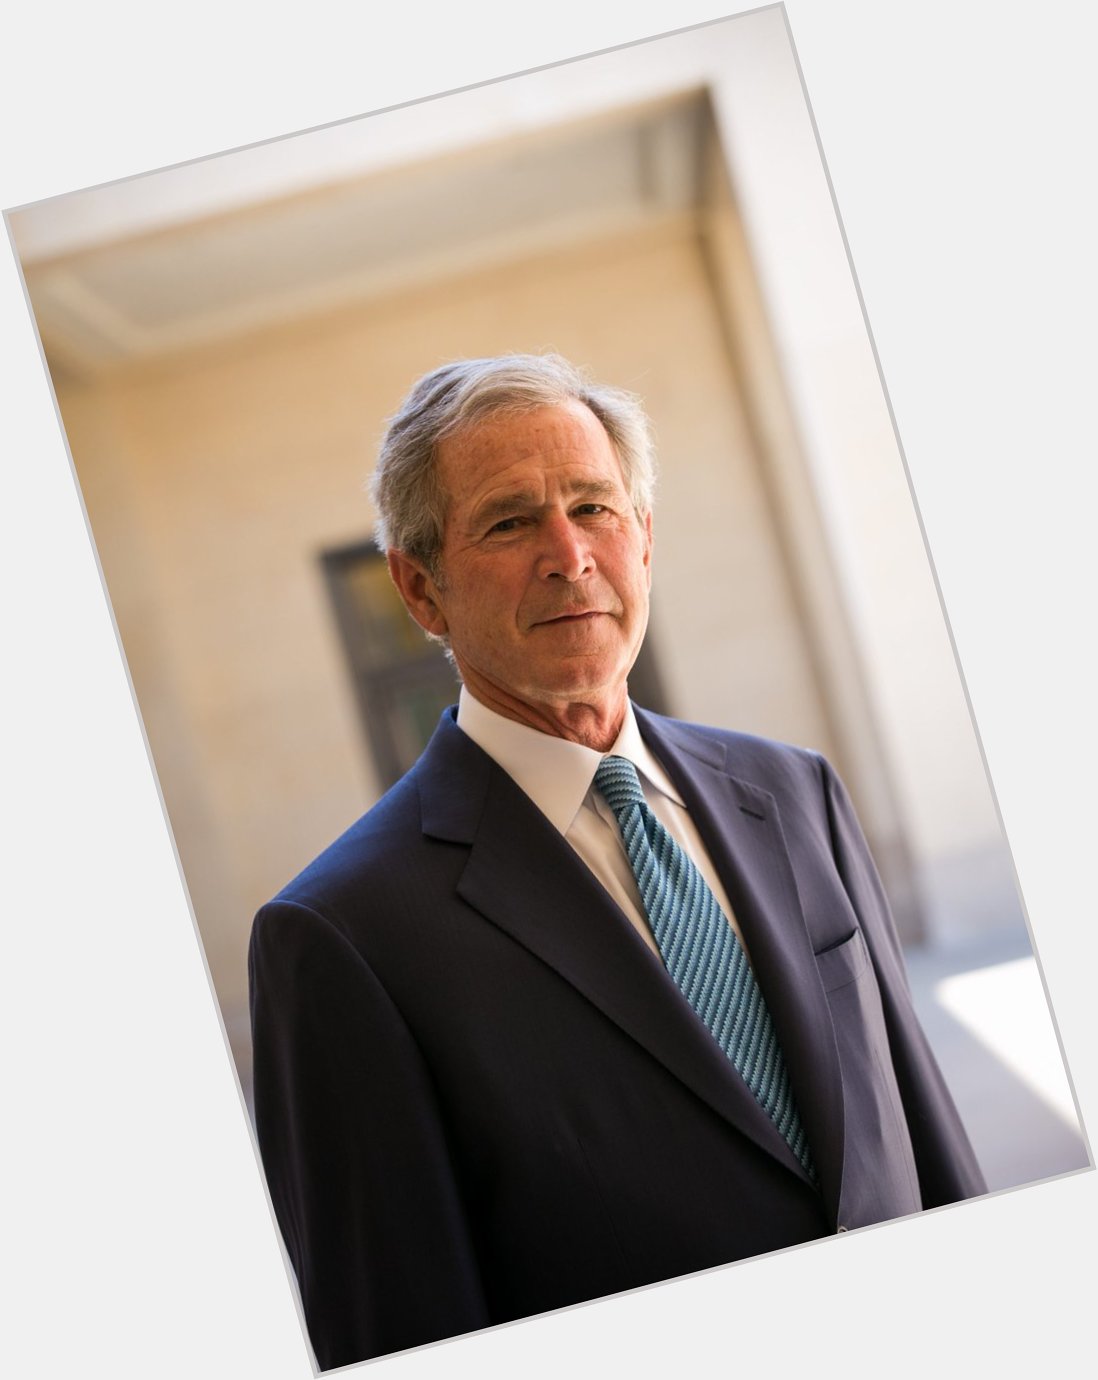 Happy Birthday to President George W. Bush, born on this day in 1946. 